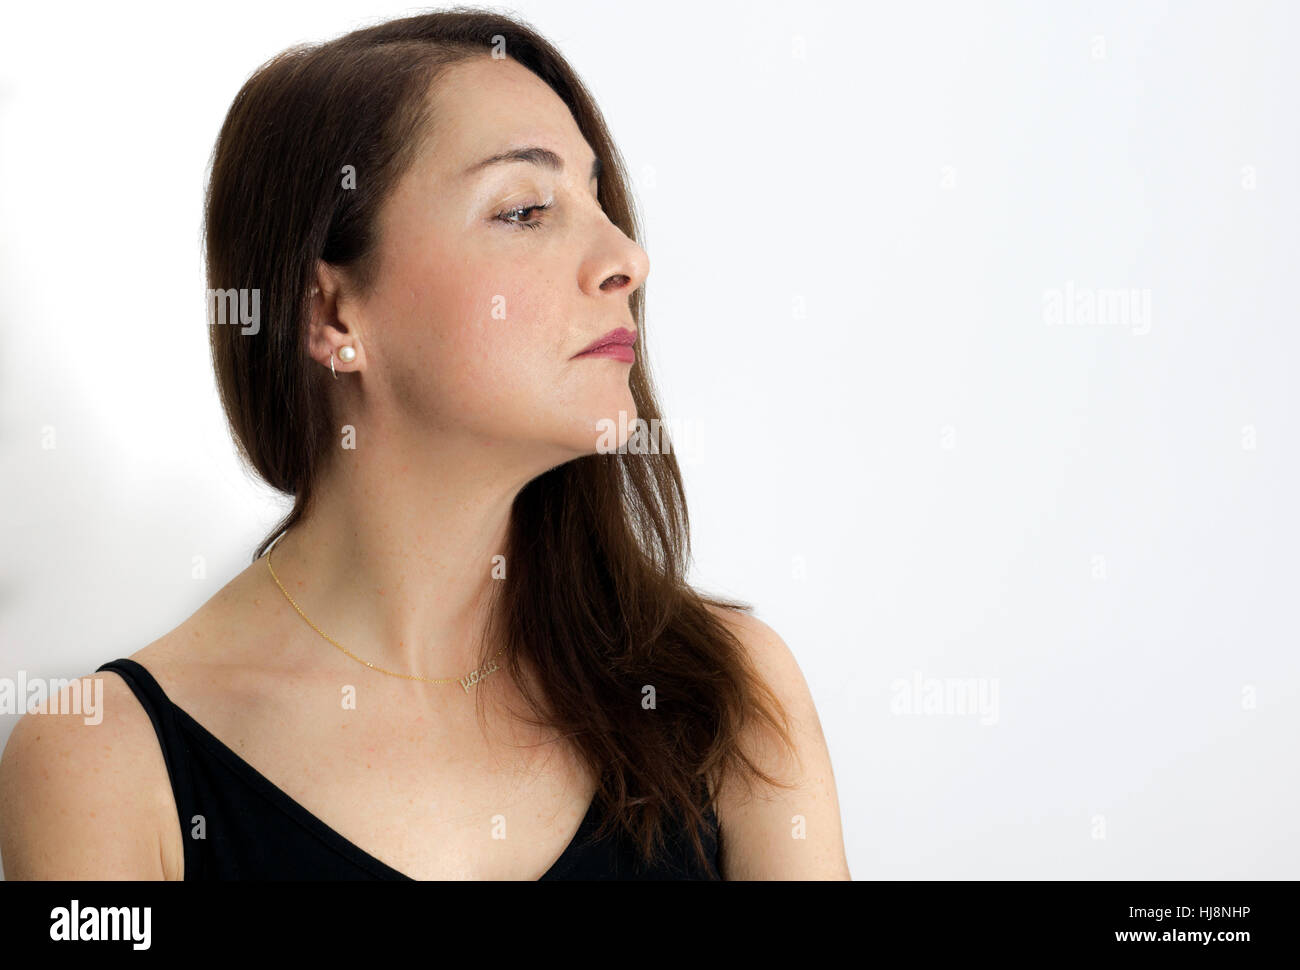 Woman Apathetic and Indifferent Stock Photo